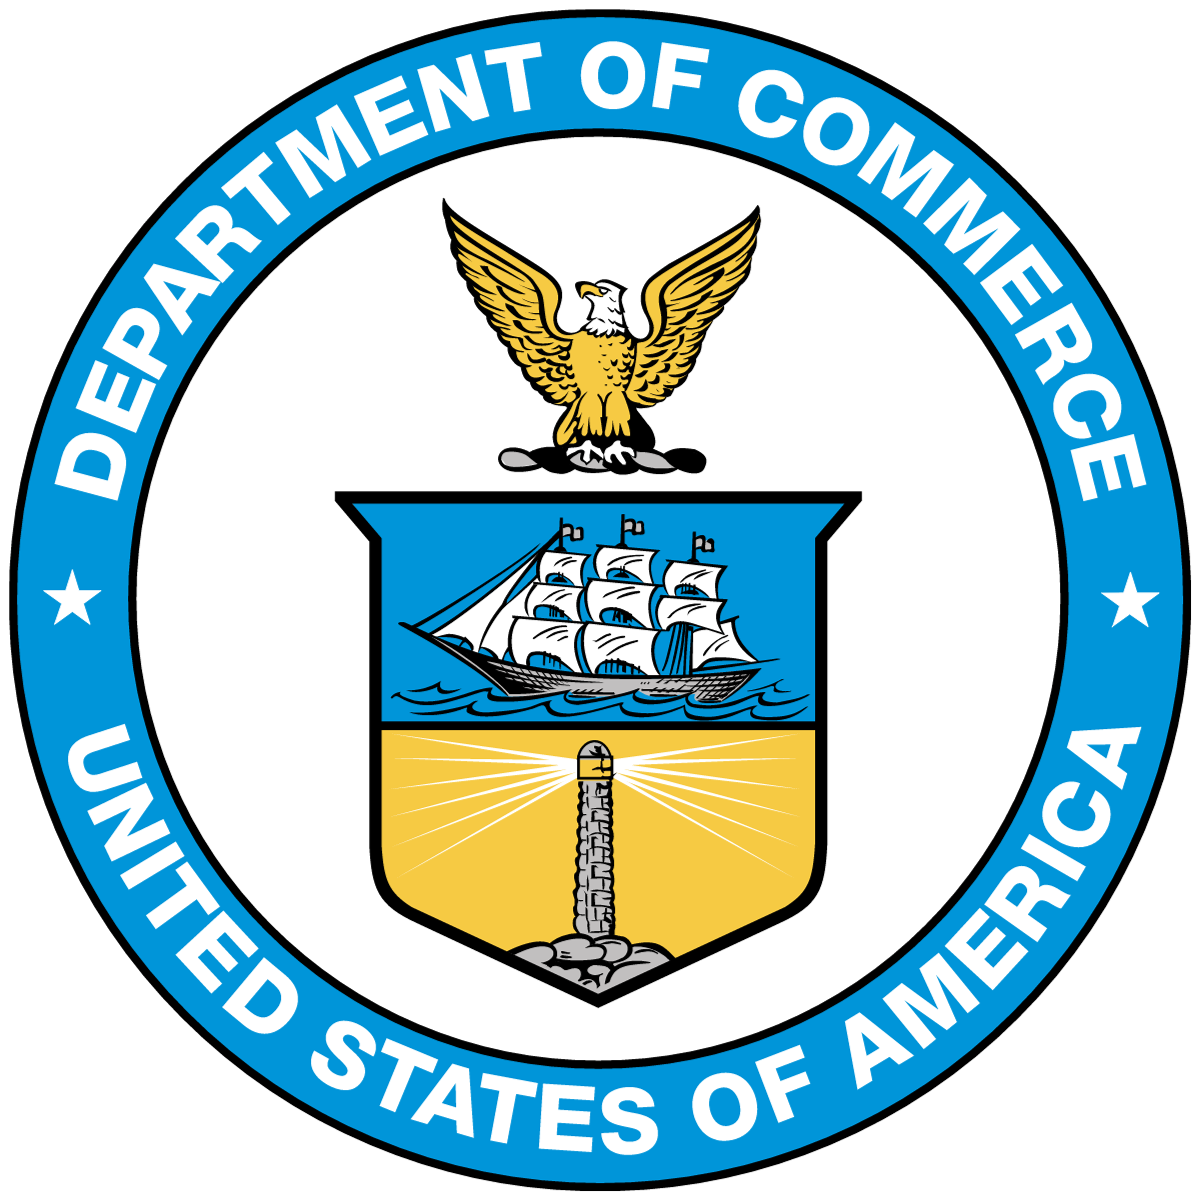 Official seal of the United States Department of Commerce